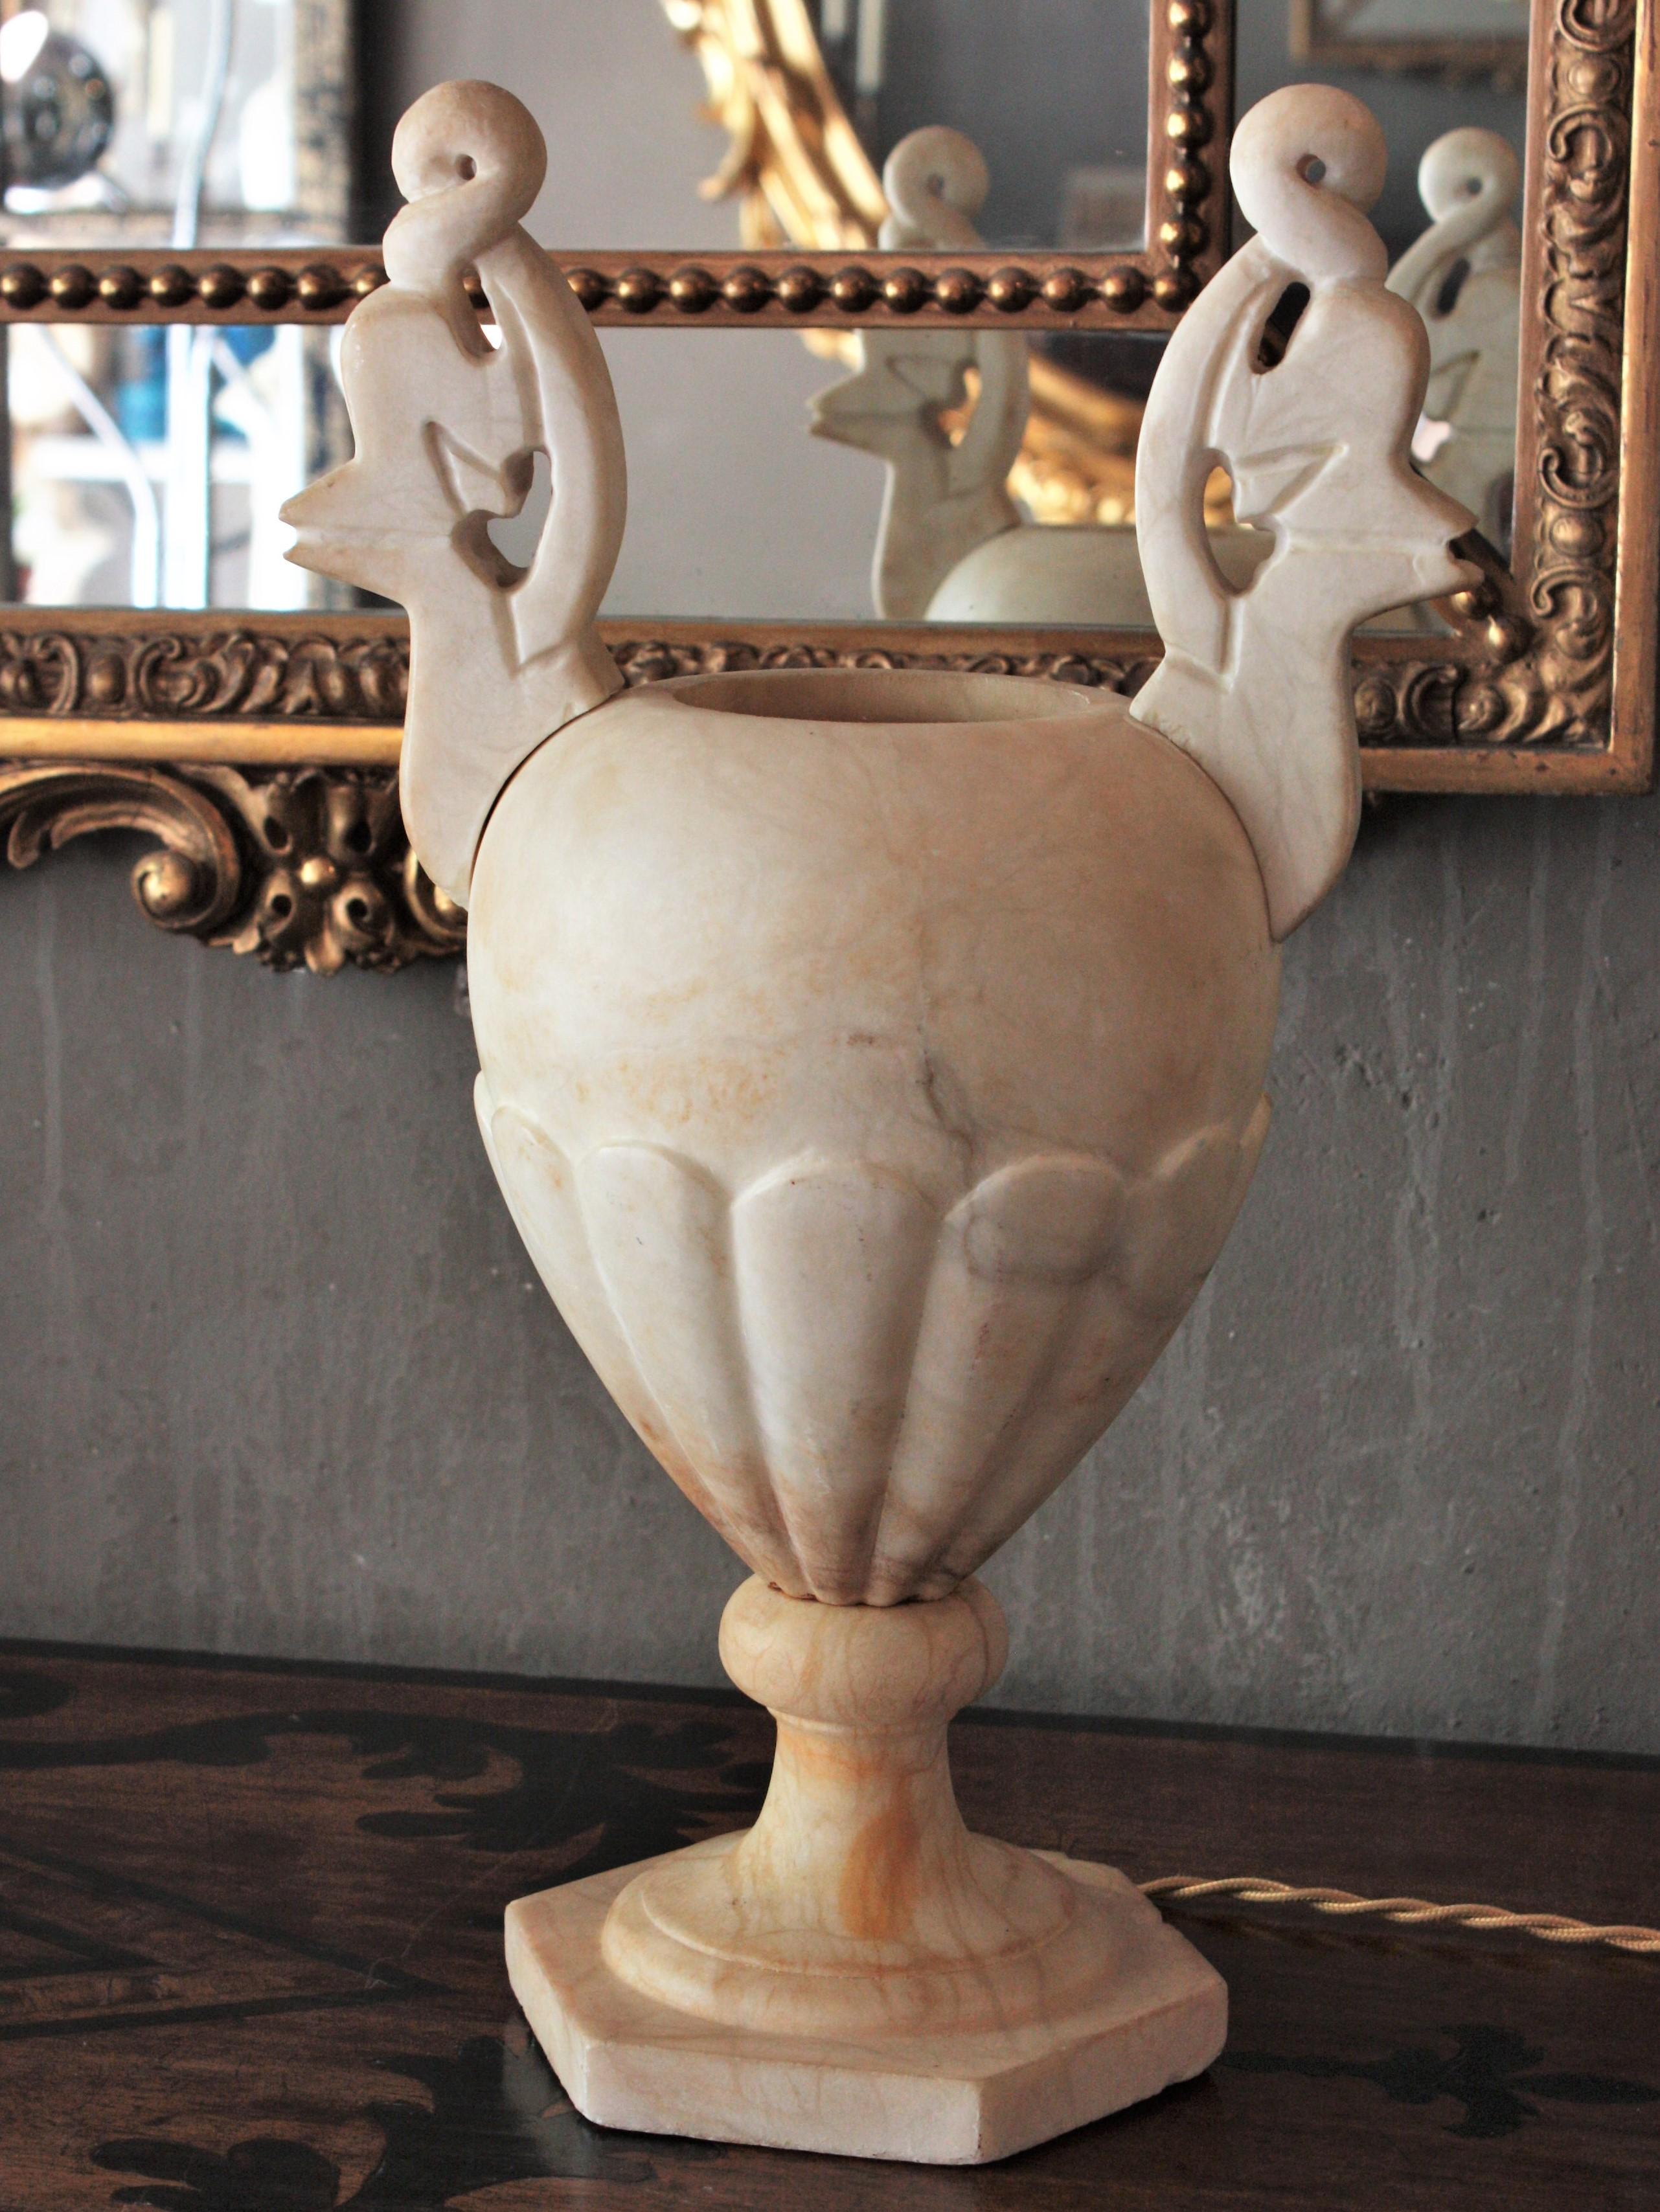 Sculptural carved alabaster Art Deco period urn table lamp with neoclassical design flanked by carved handles. Spain, 1930s.
It has carved decorations on the bottom part and hand carved handles adorning the top at both sides. 
Impressive